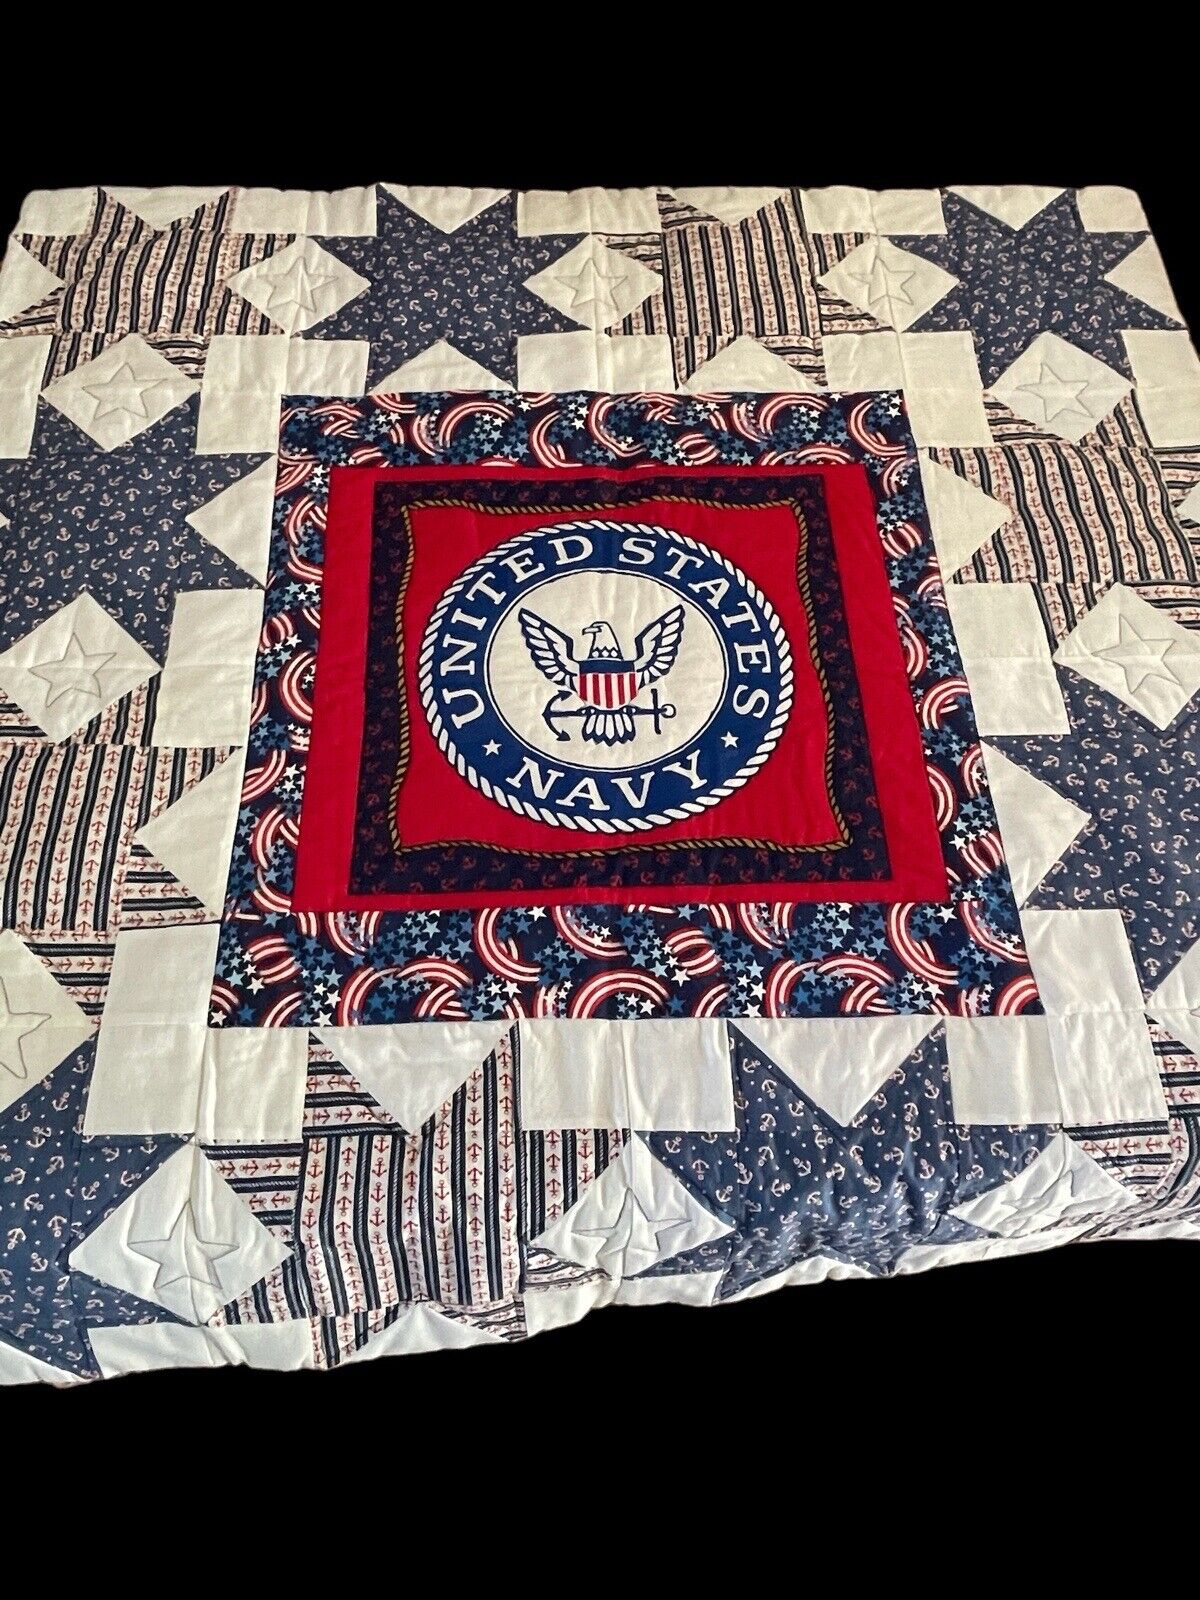 United States Navy Handmade Quilt Red White And Blue 45.5” x 45.5” Never Used